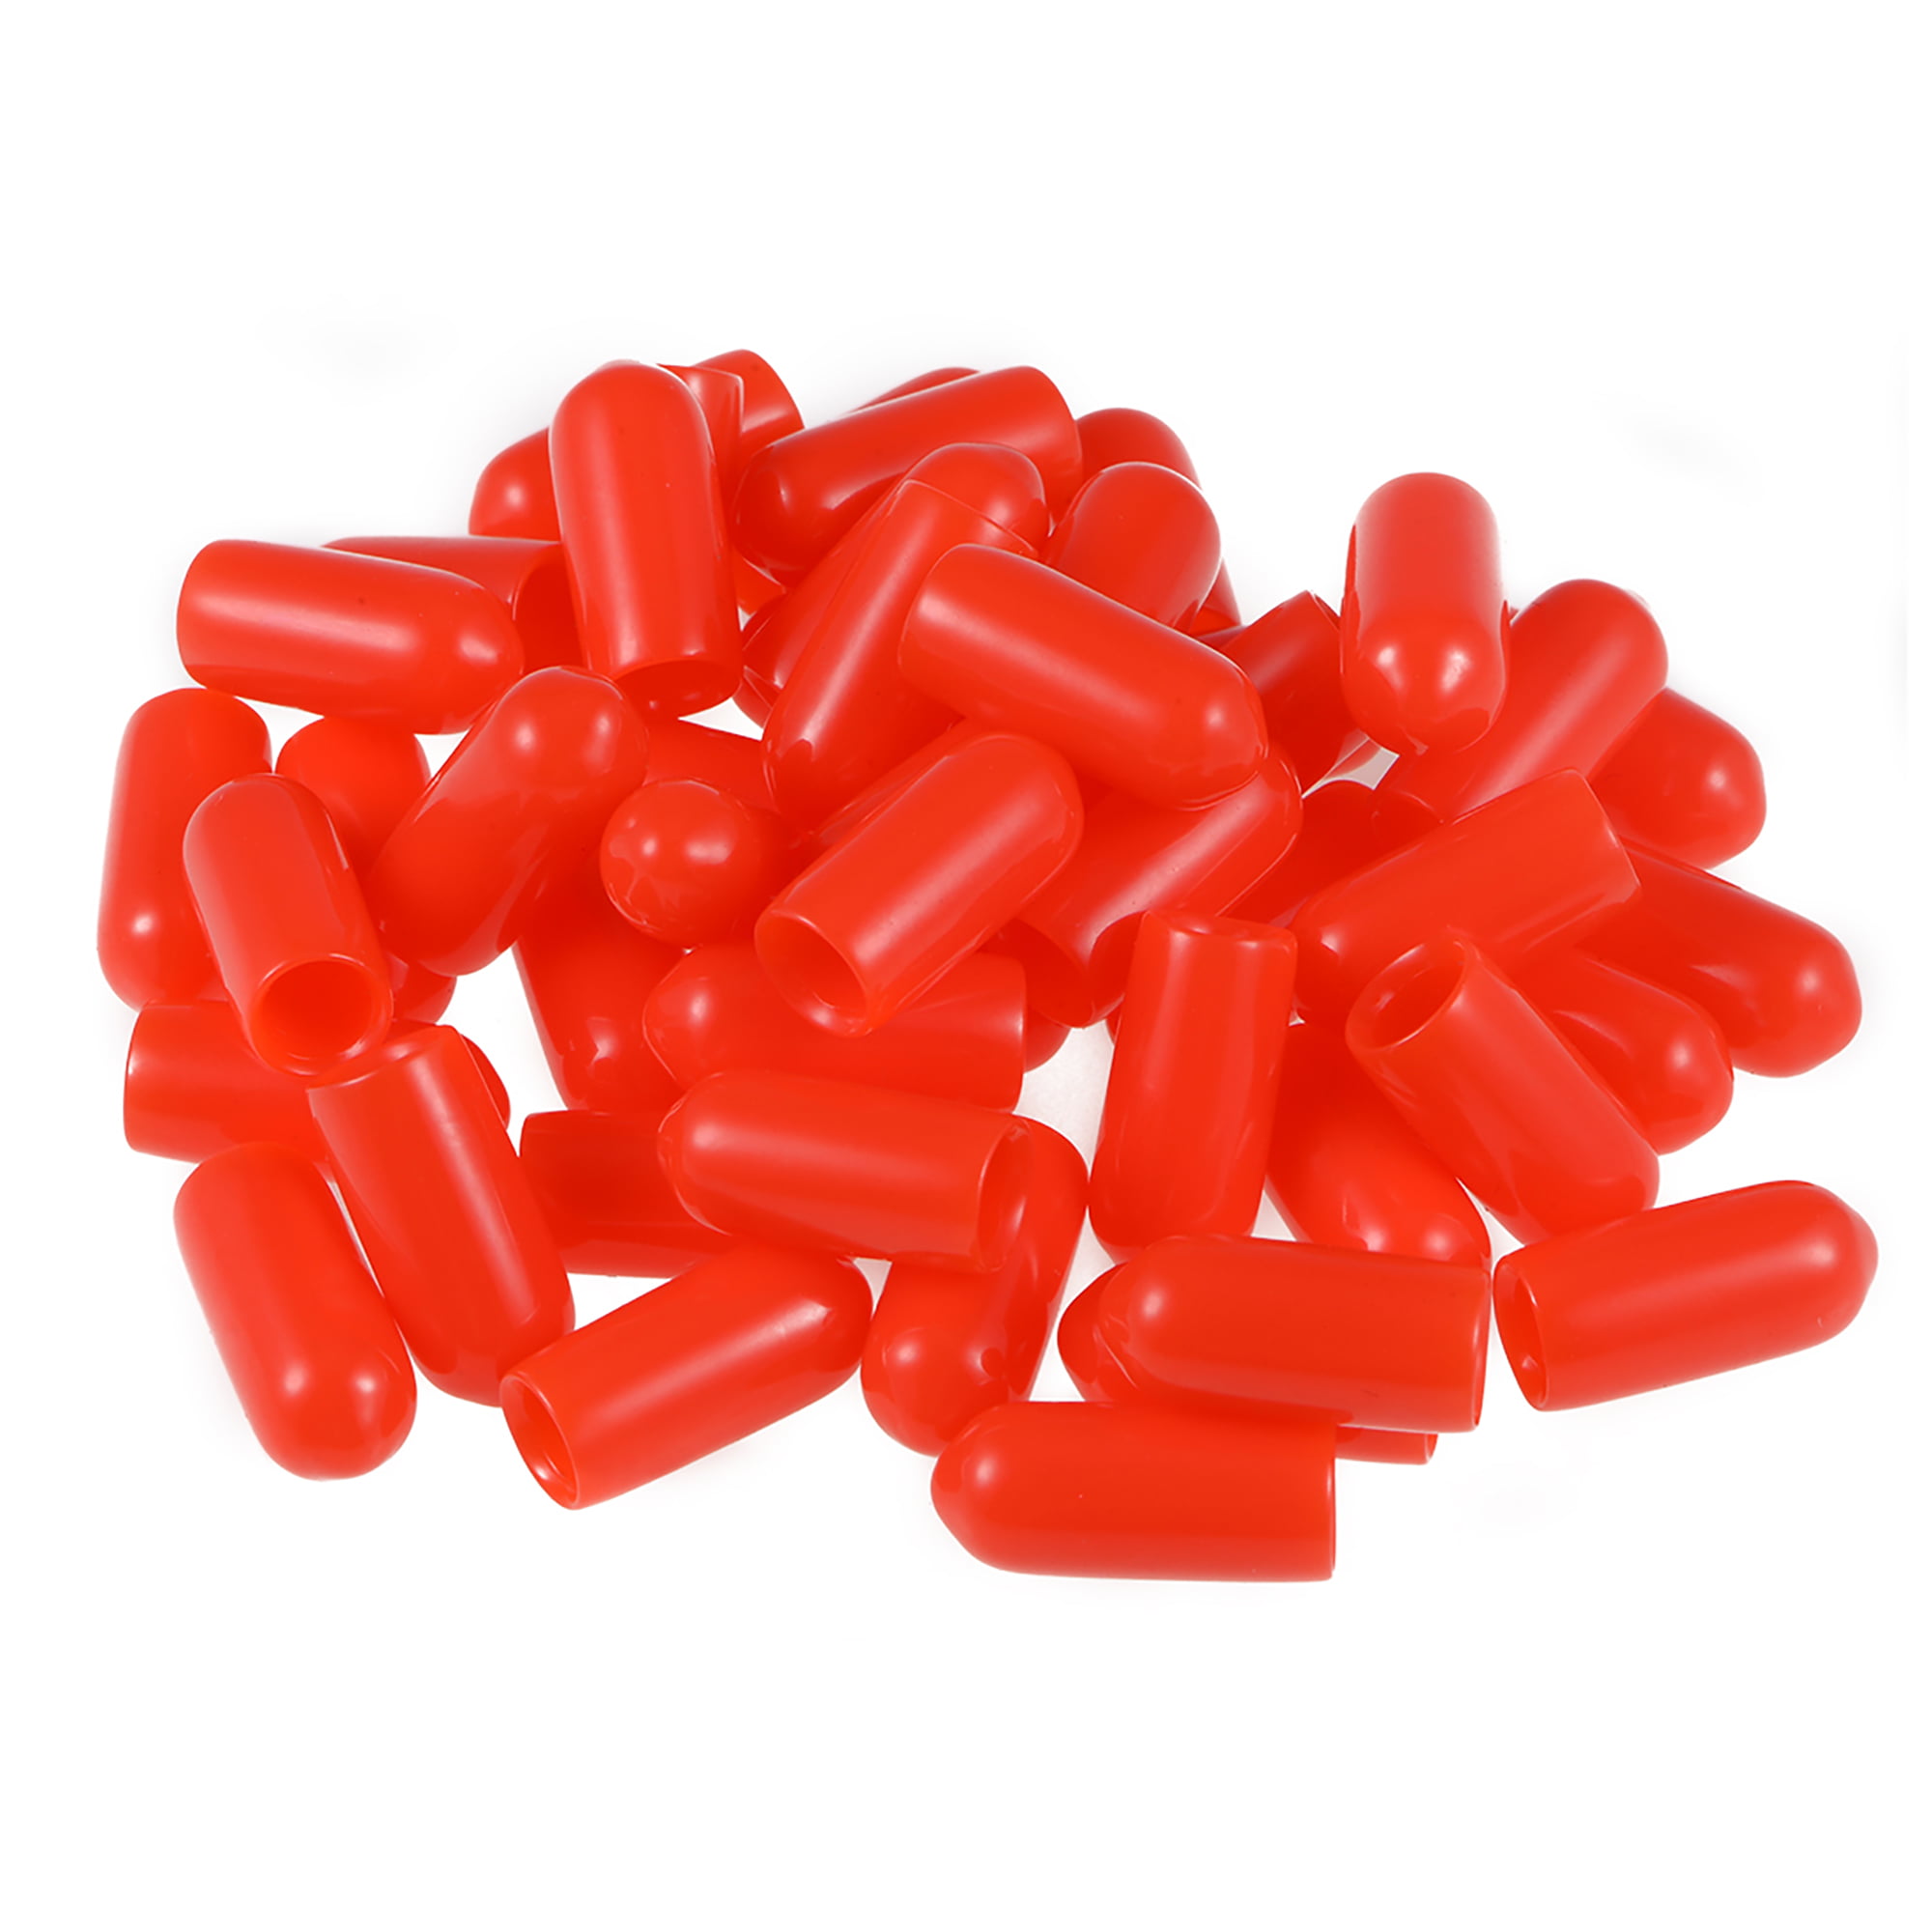 7mm ID 15mm Length Round End Cap Cover Red 50pcs Screw Thread Protectors 